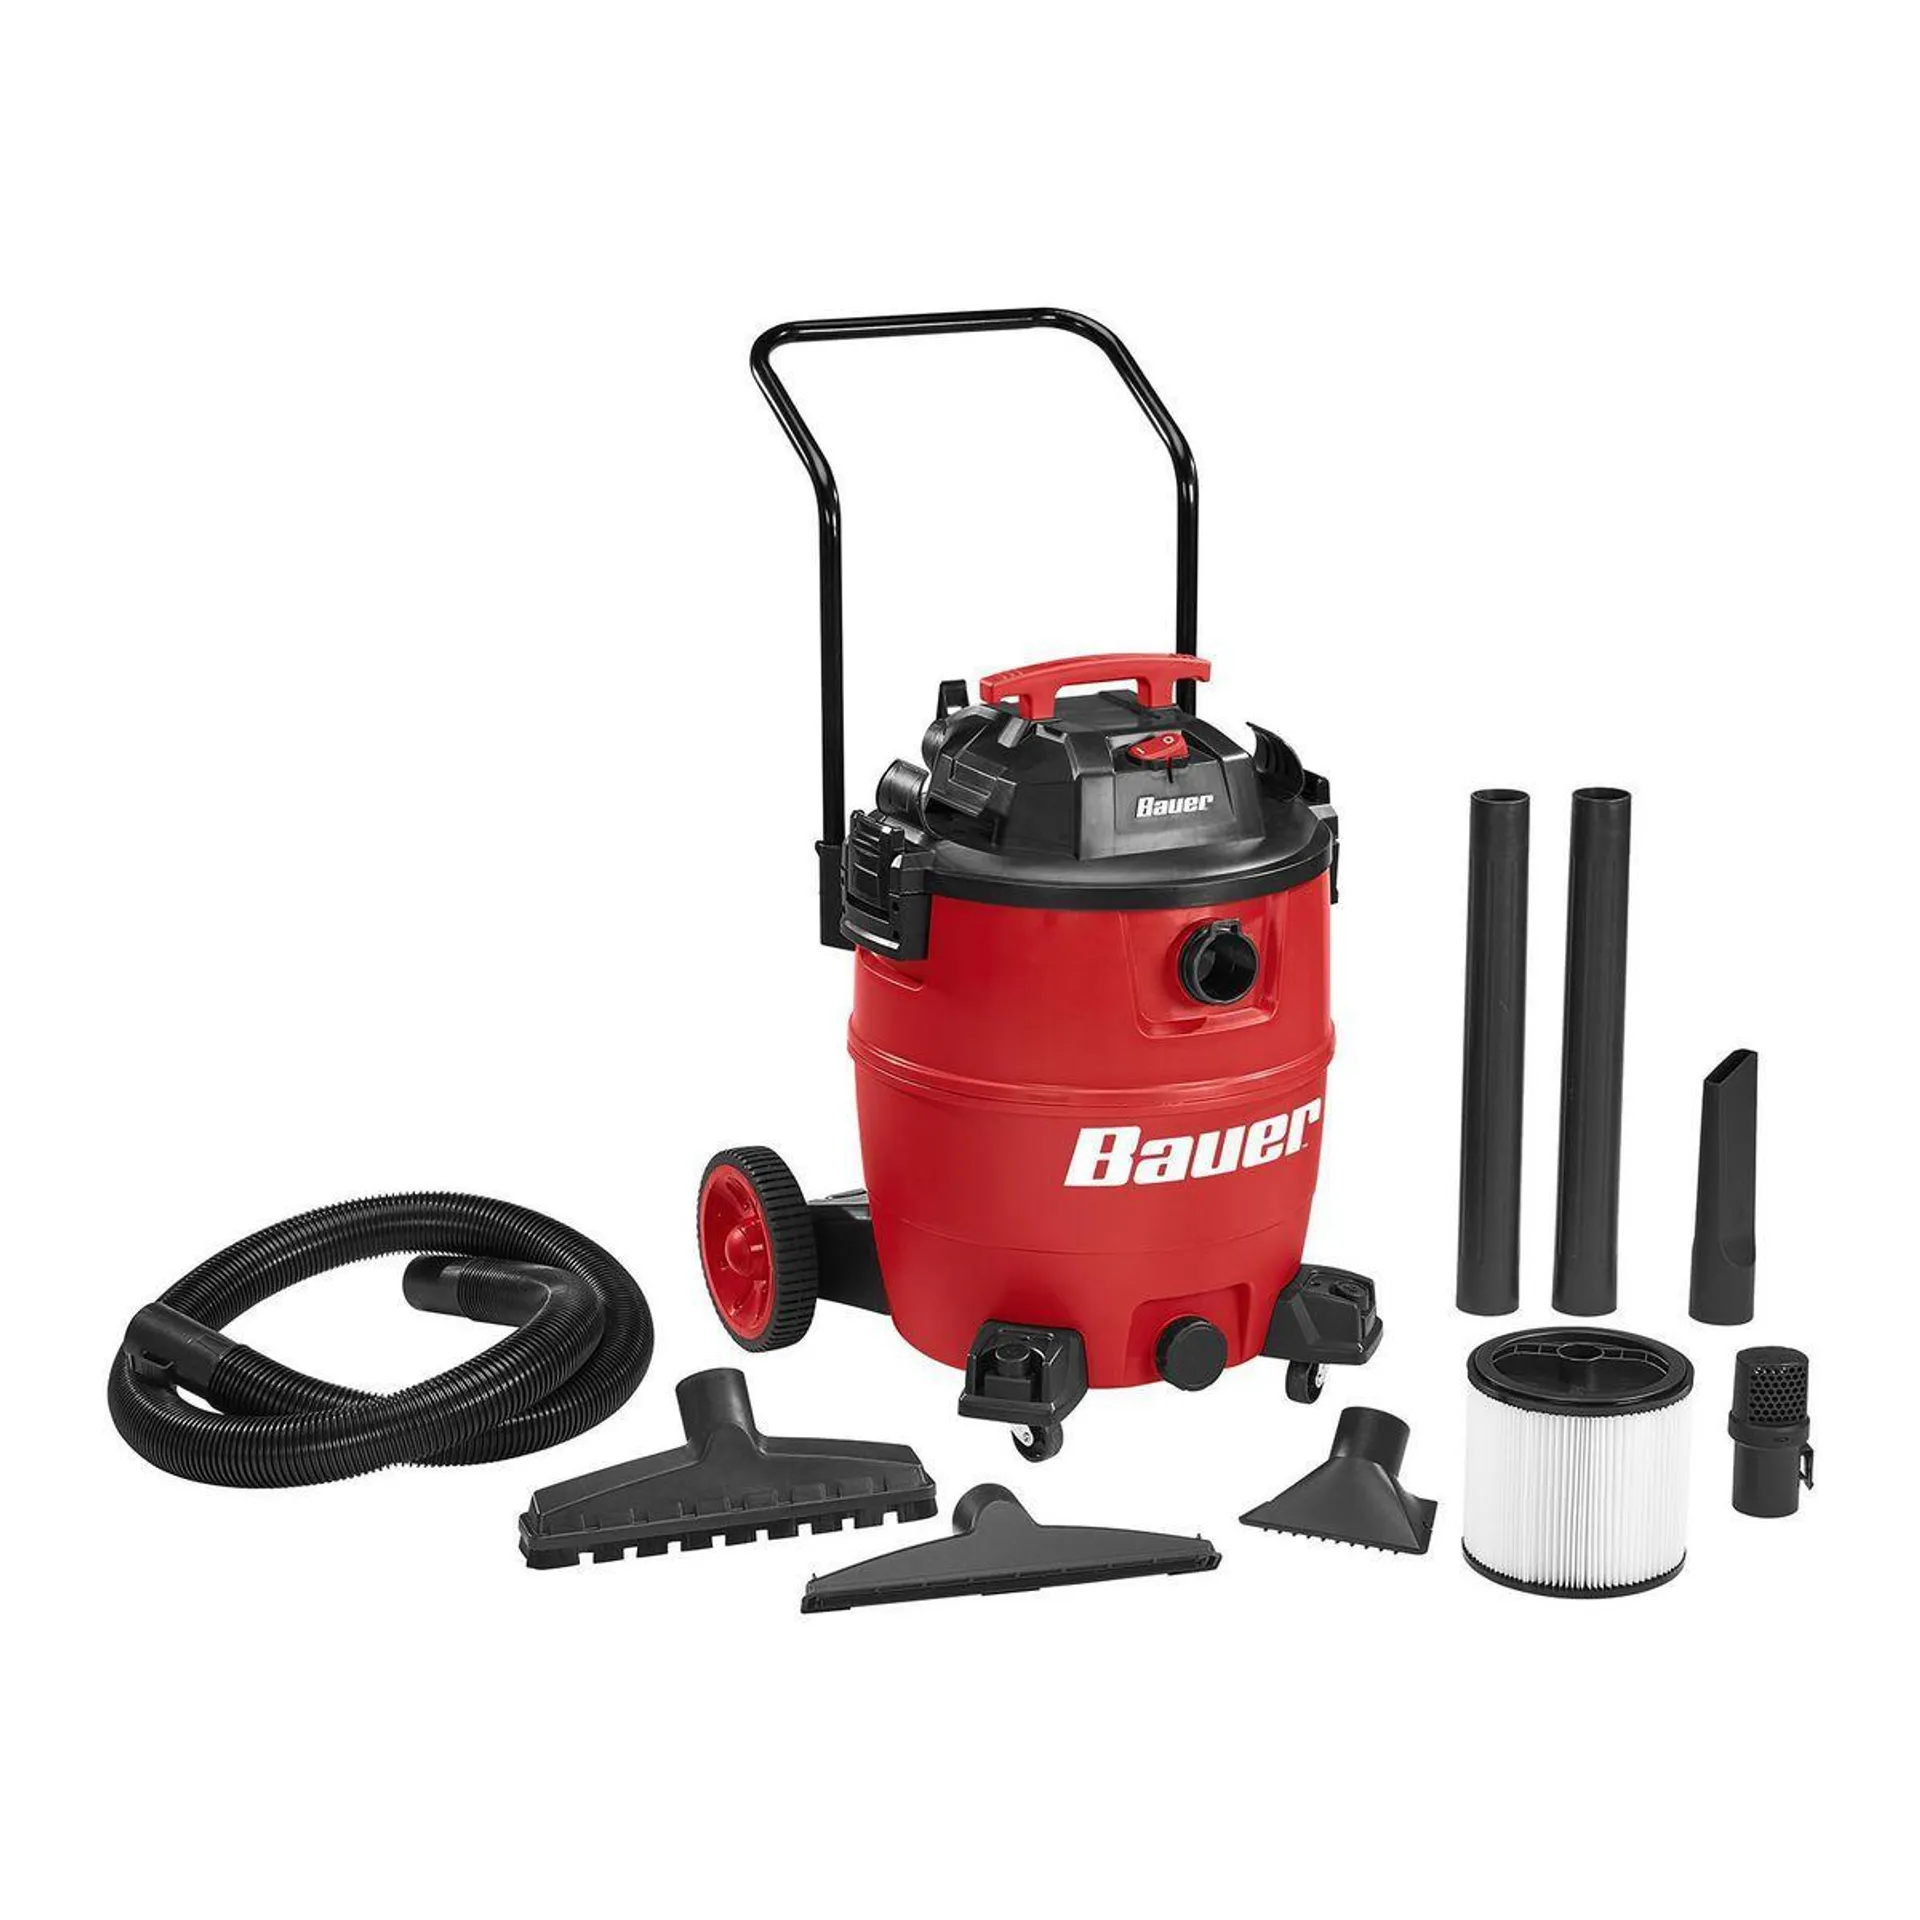 BAUER 16 Gallon Wet/Dry Vacuum with Cart